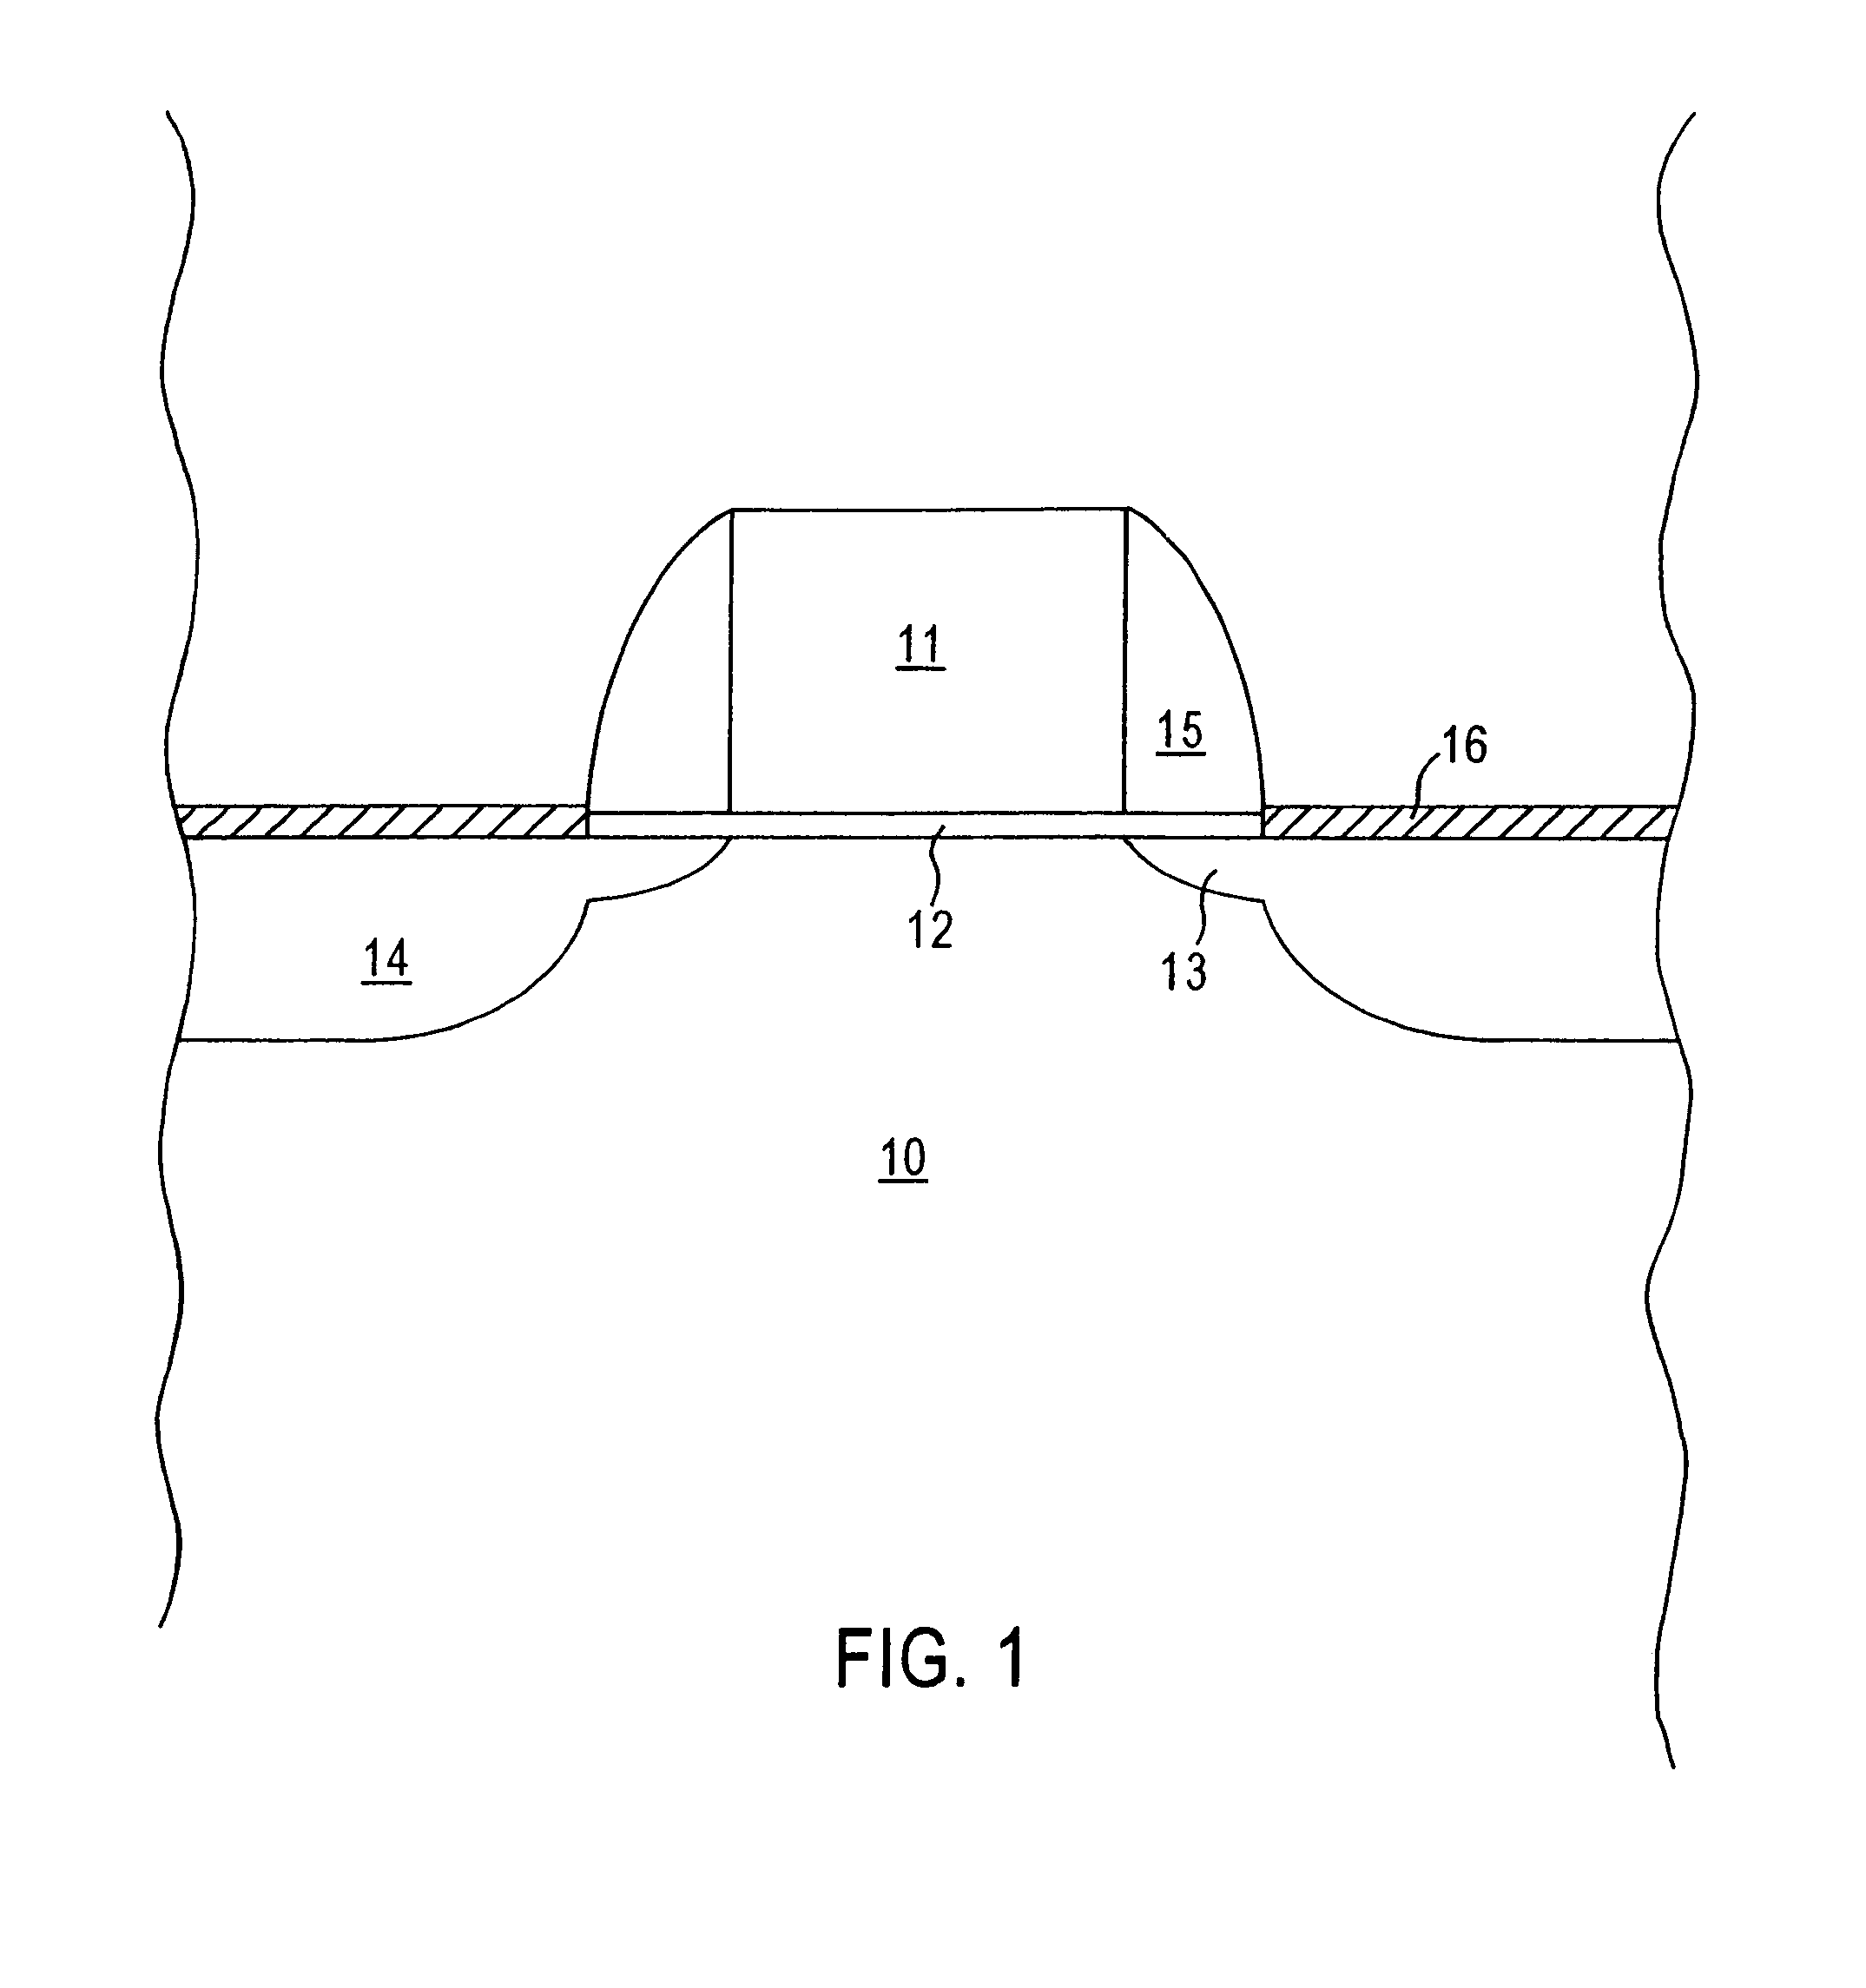 Semiconductor device with metal gate and high-k tantalum oxide or tantalum oxynitride gate dielectric